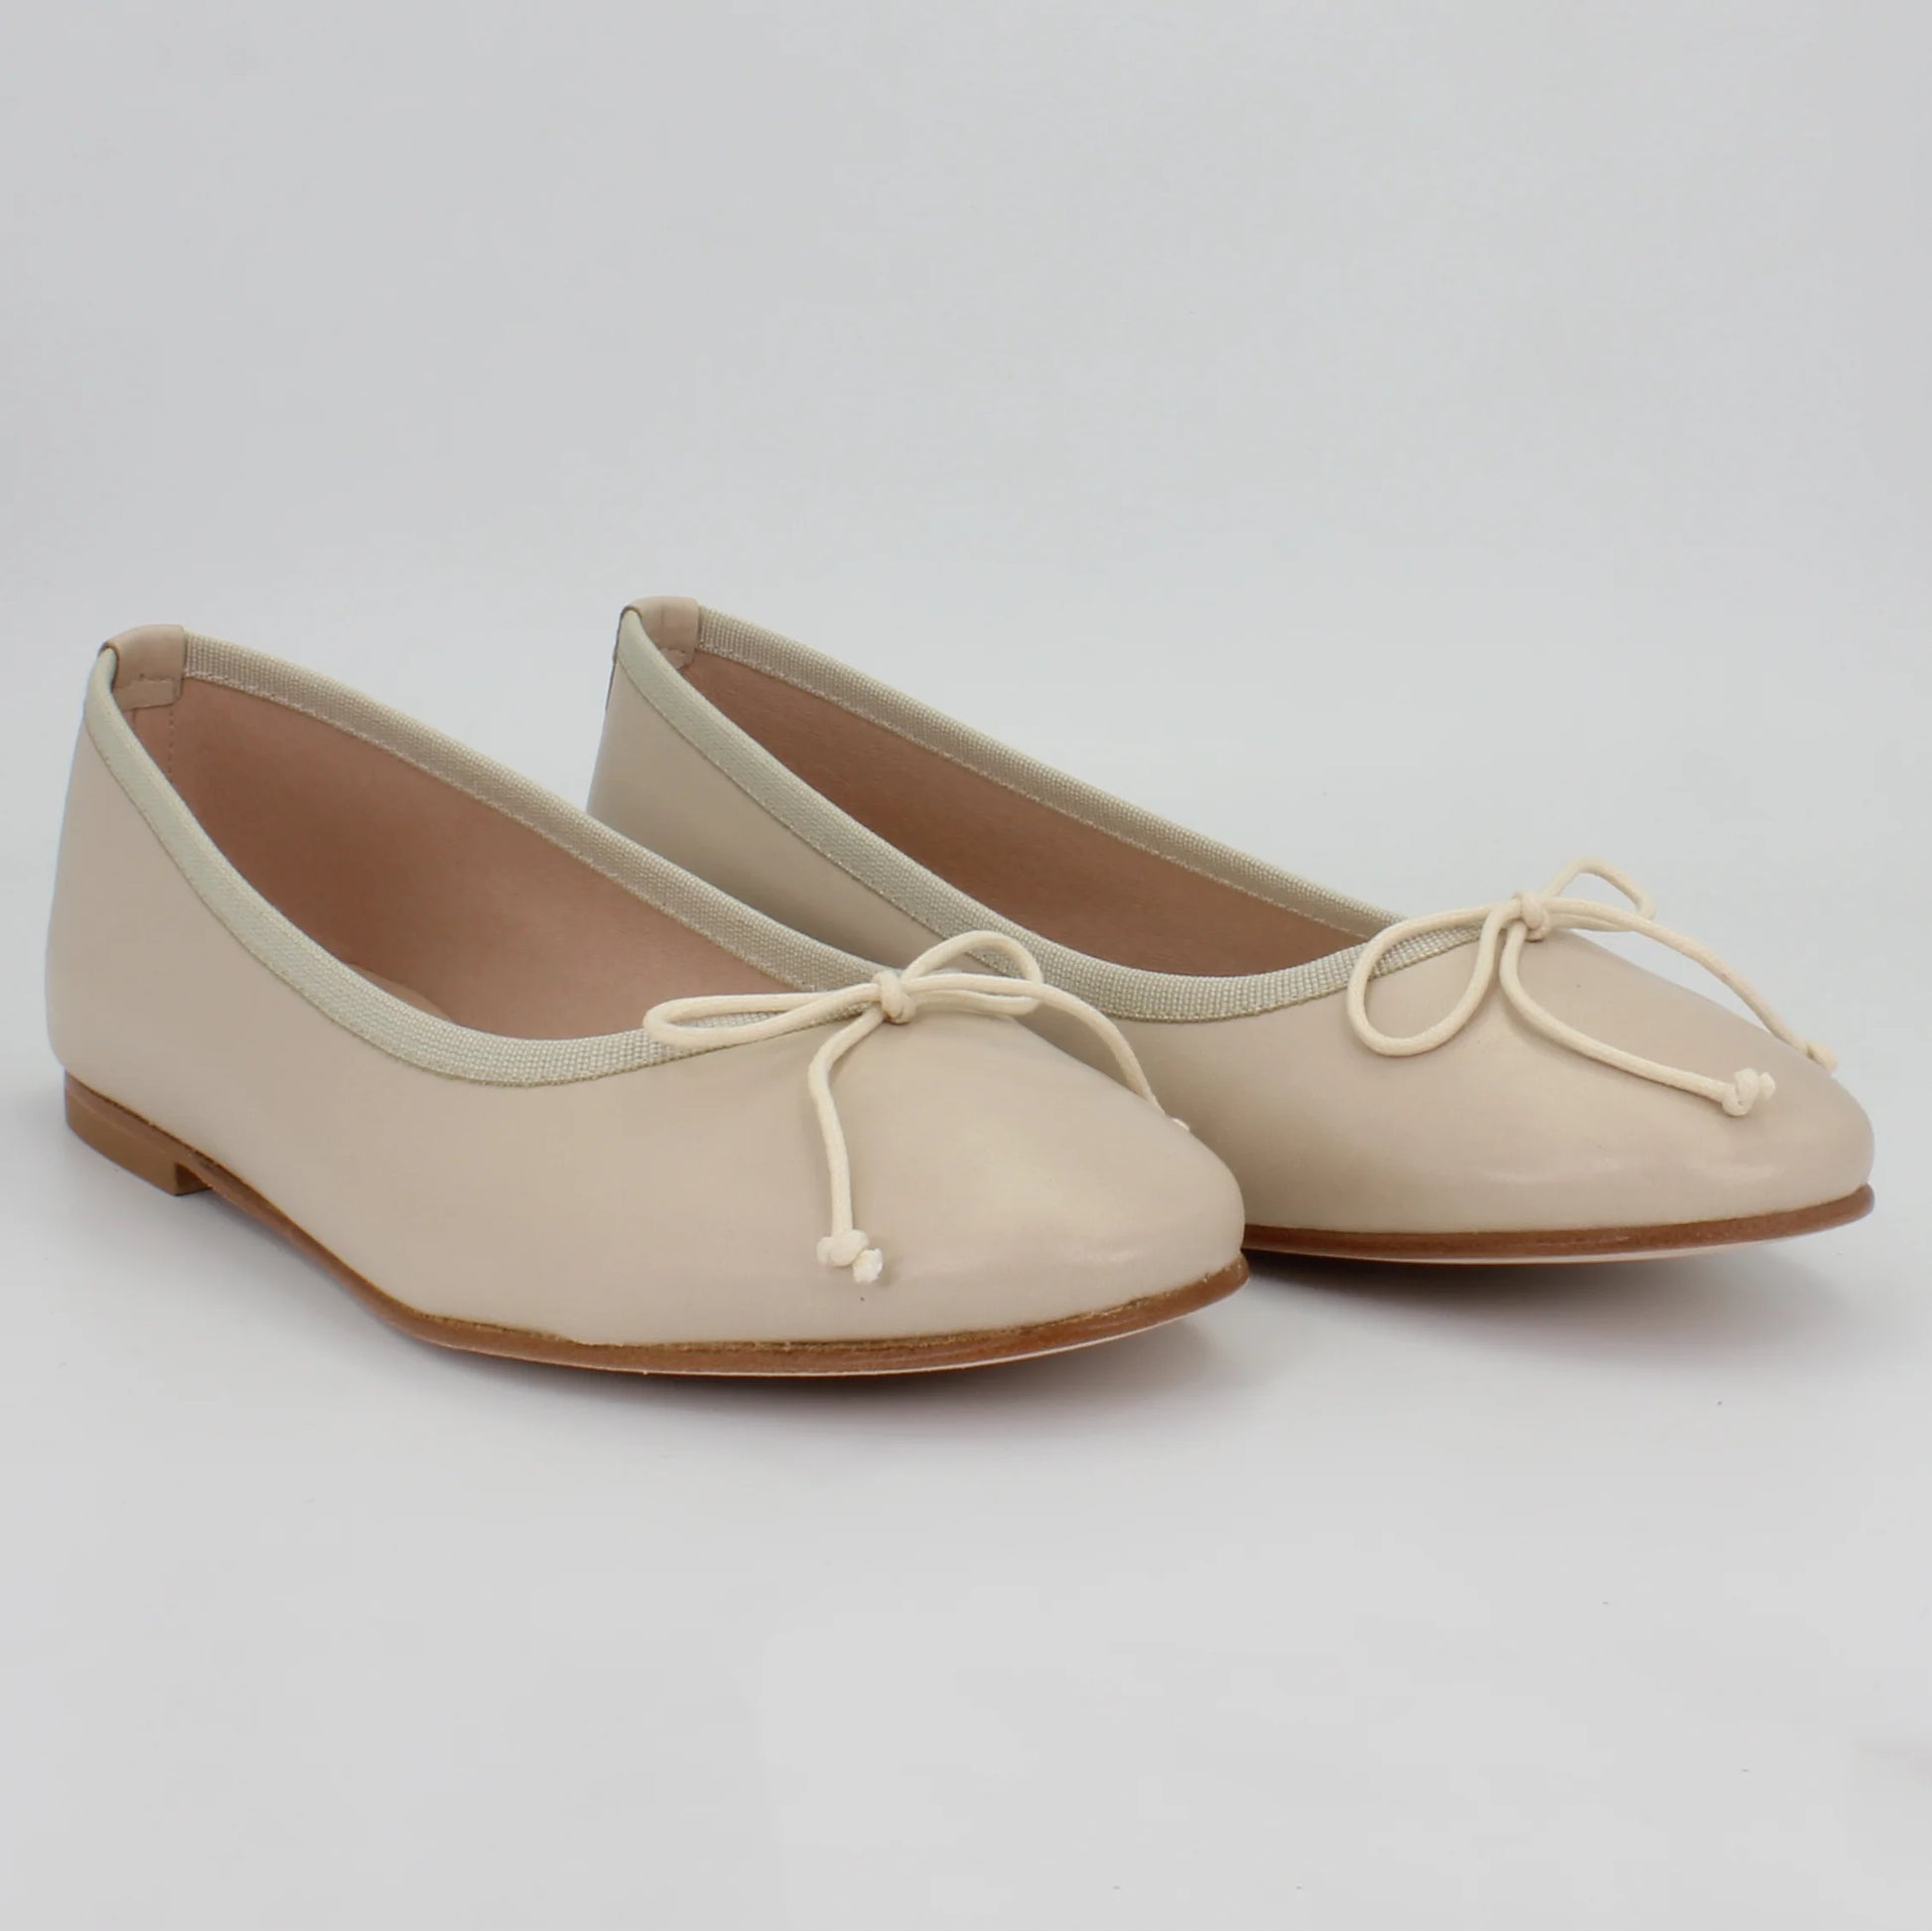 Shop Handmade Italian Leather Ballerina pump in ice cream (E429) or browse our range of hand-made Italian shoes in leather or suede in-store at Aliverti Cape Town, or shop online. We deliver in South Africa & offer multiple payment plans as well as accept multiple safe & secure payment methods.